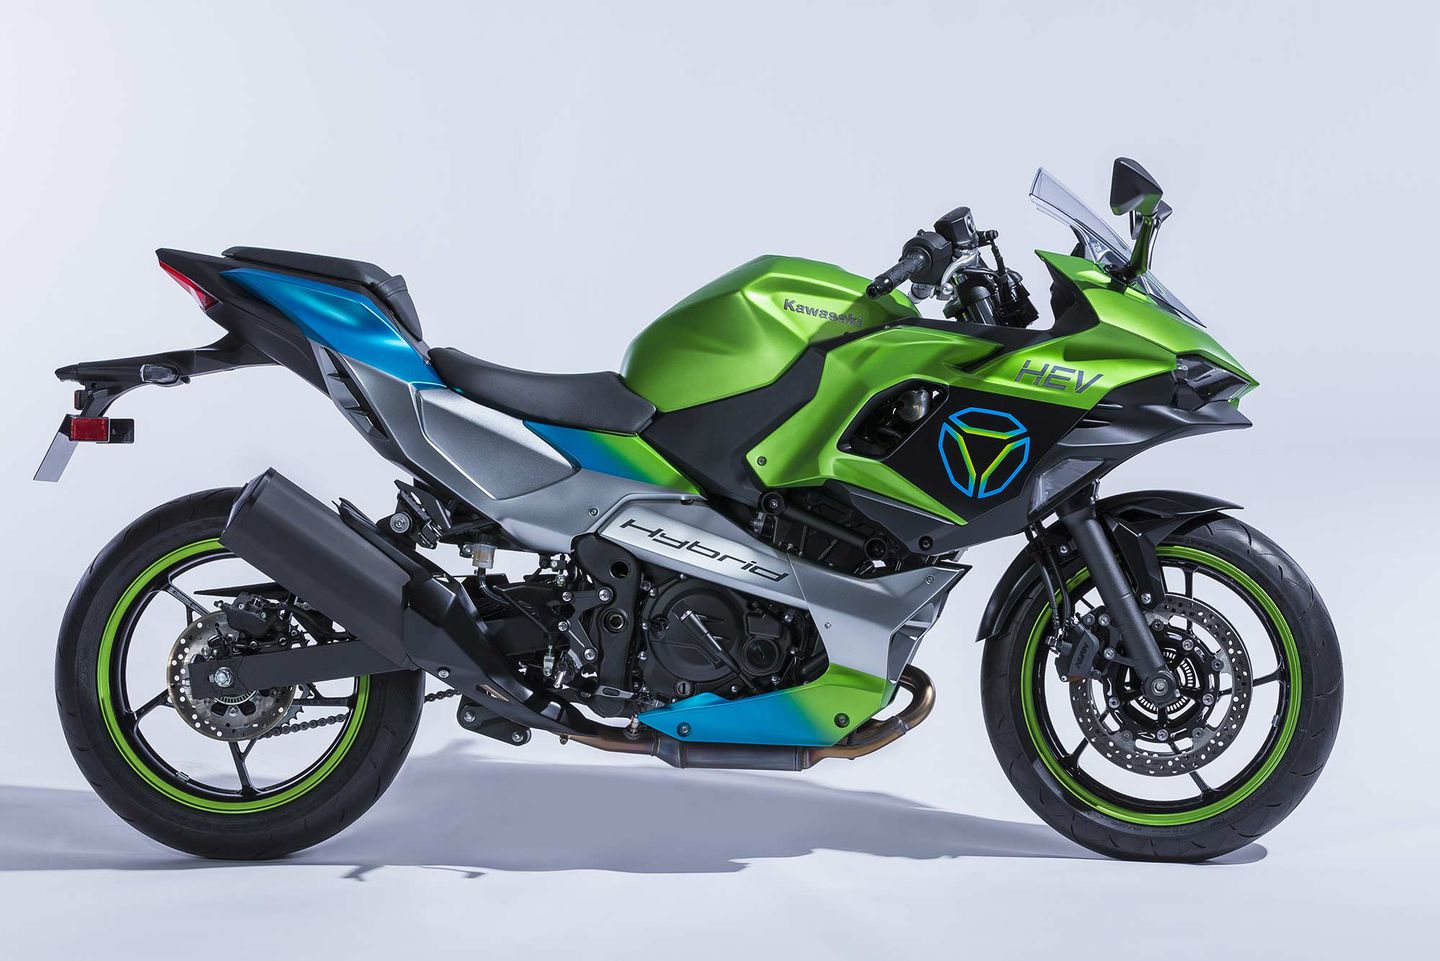 Kawasaki's reveal of four bikes at EICMA included several electric options, a hybrid, and an experimental hydrogen concept. Media sourced from CycleWorld.